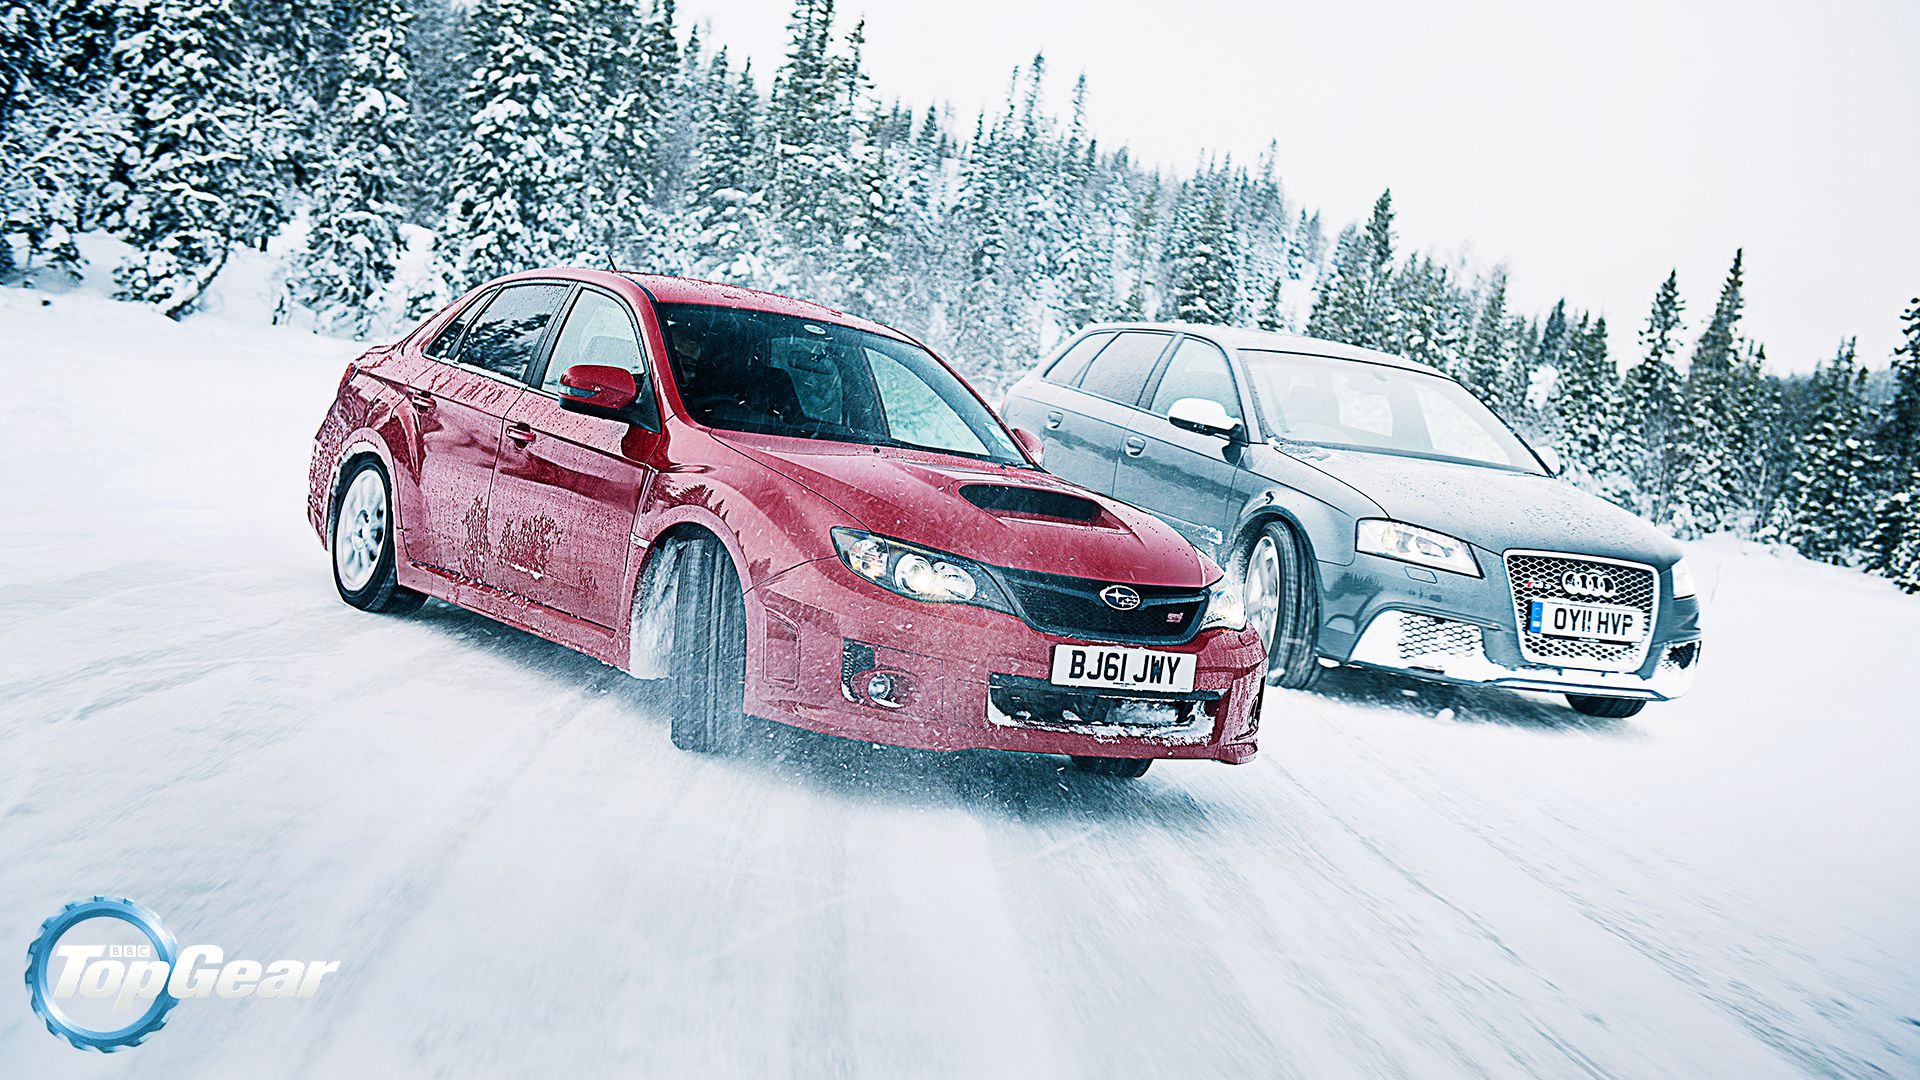 Top Gear's Finest Cars And Snow Photo